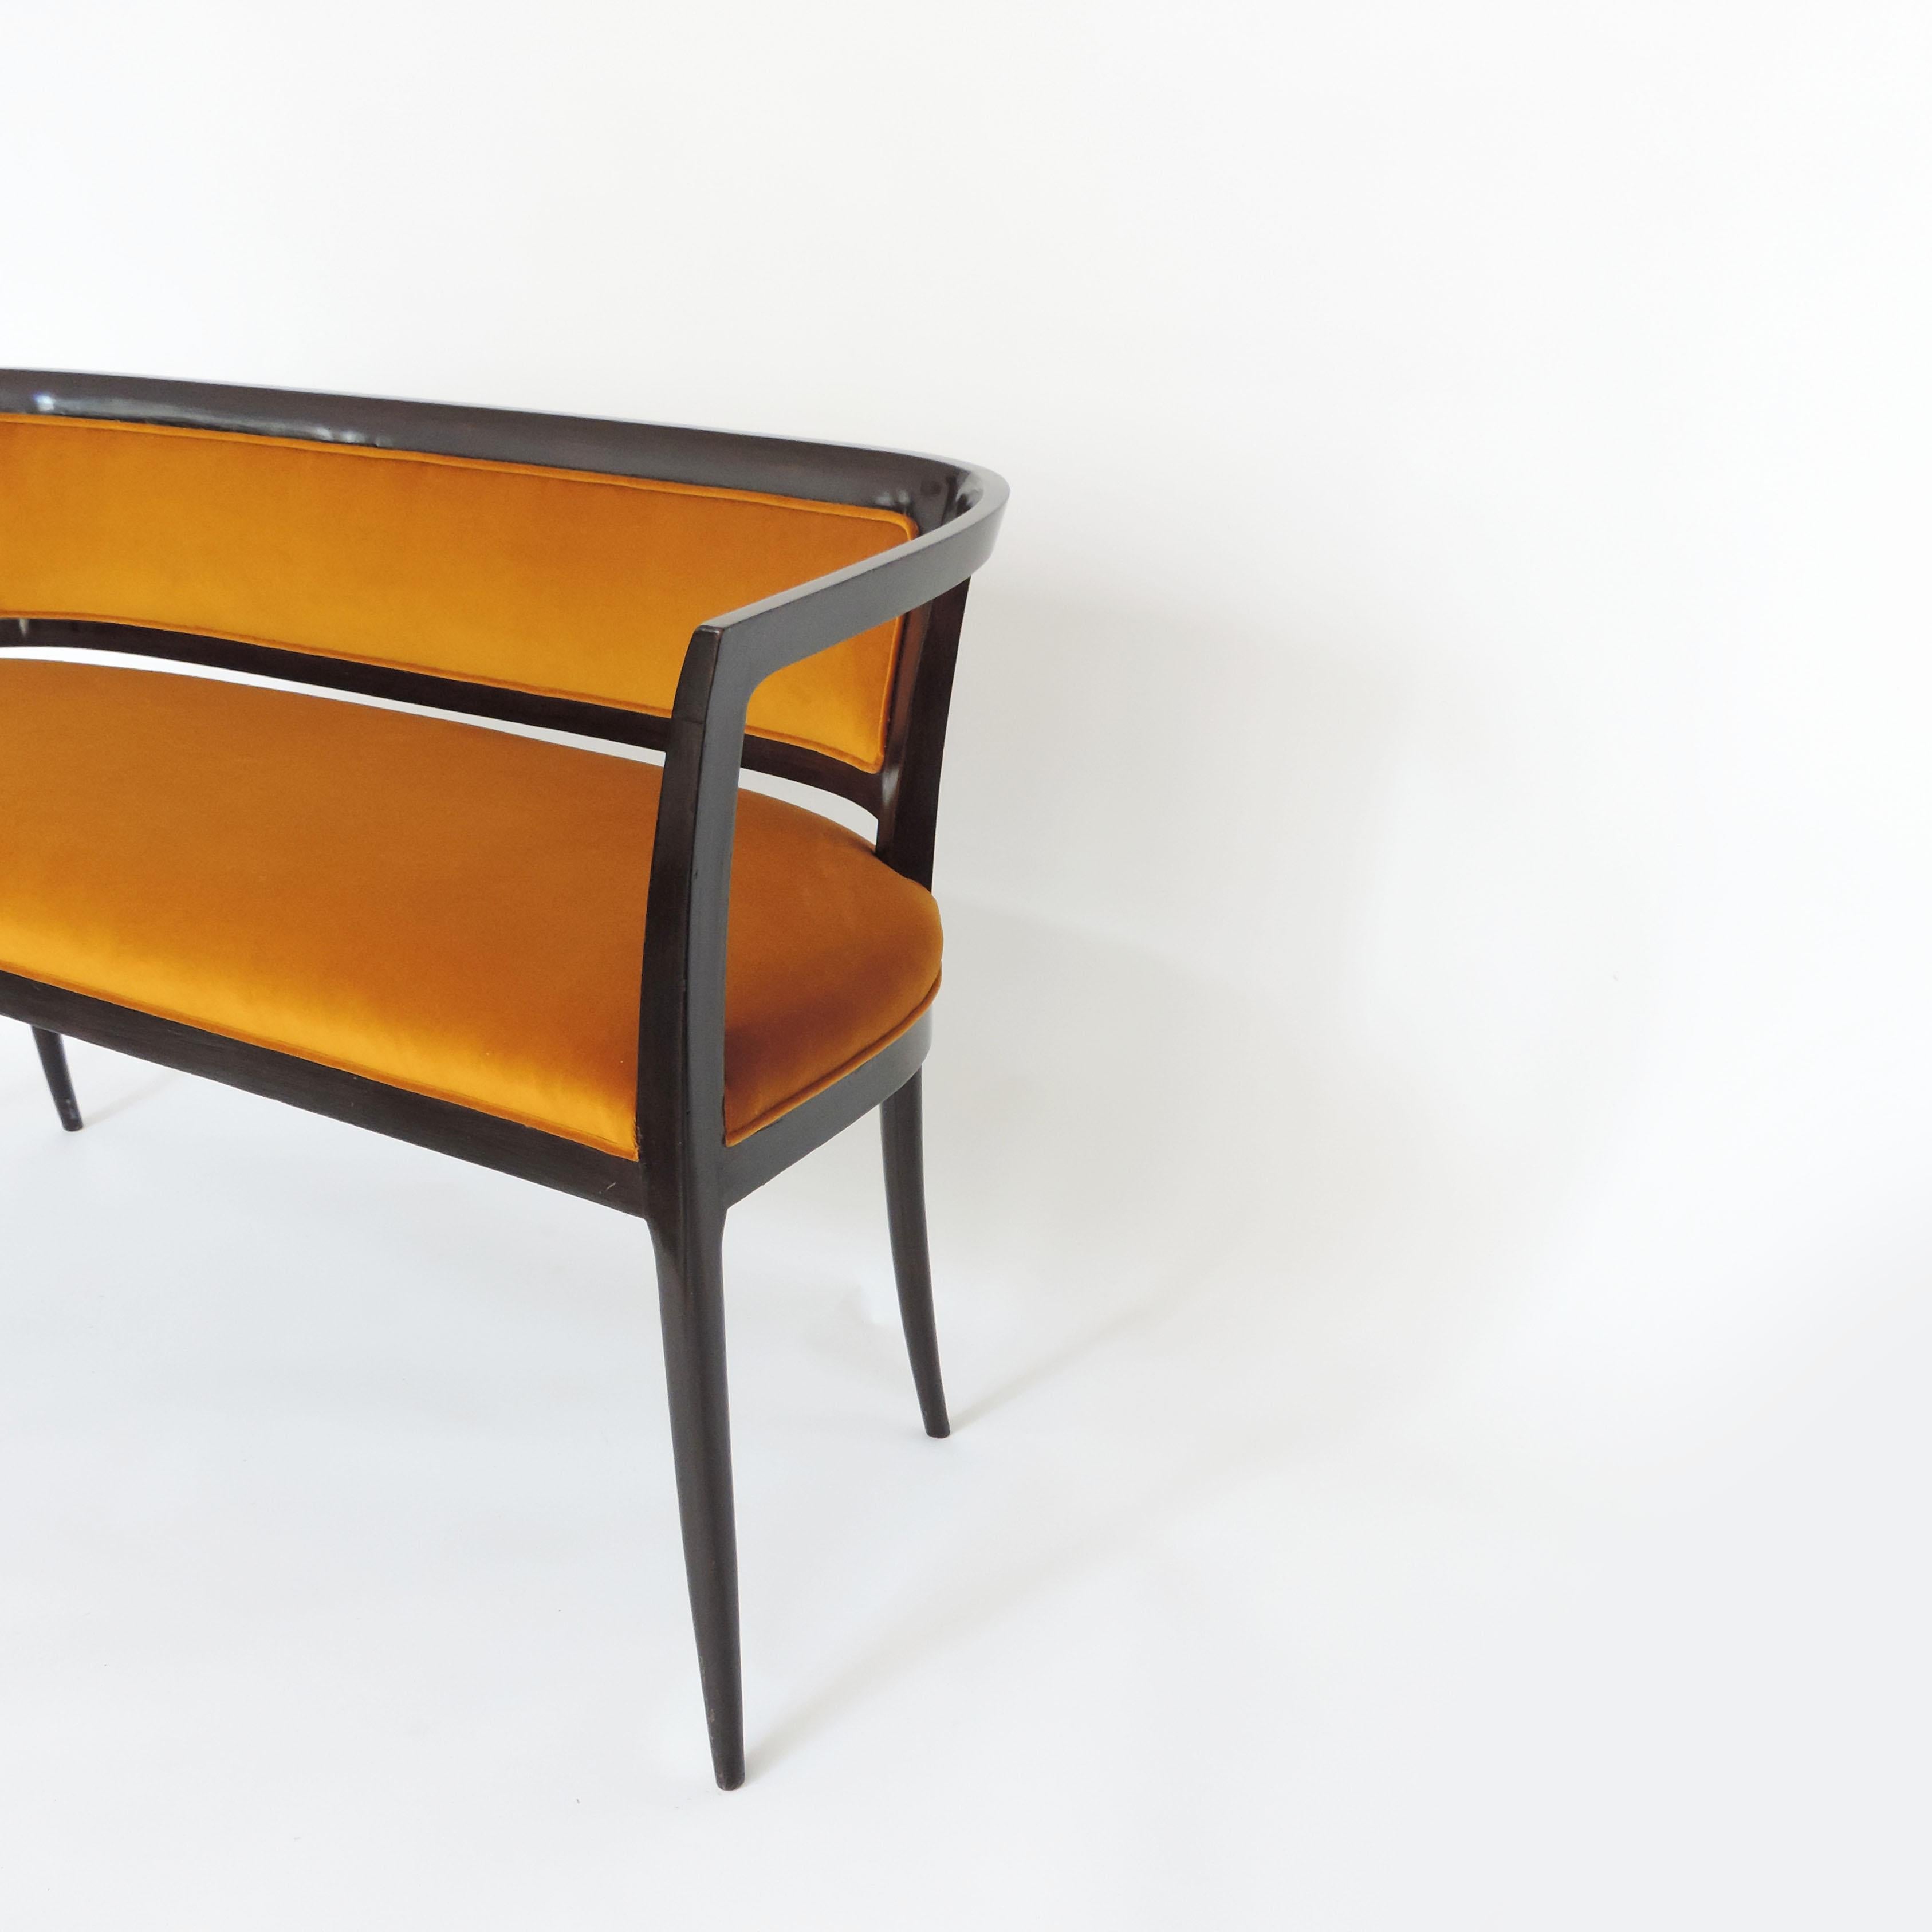 Paolo Buffa settee in wood and ochre velvet, Italy, 1940s
   